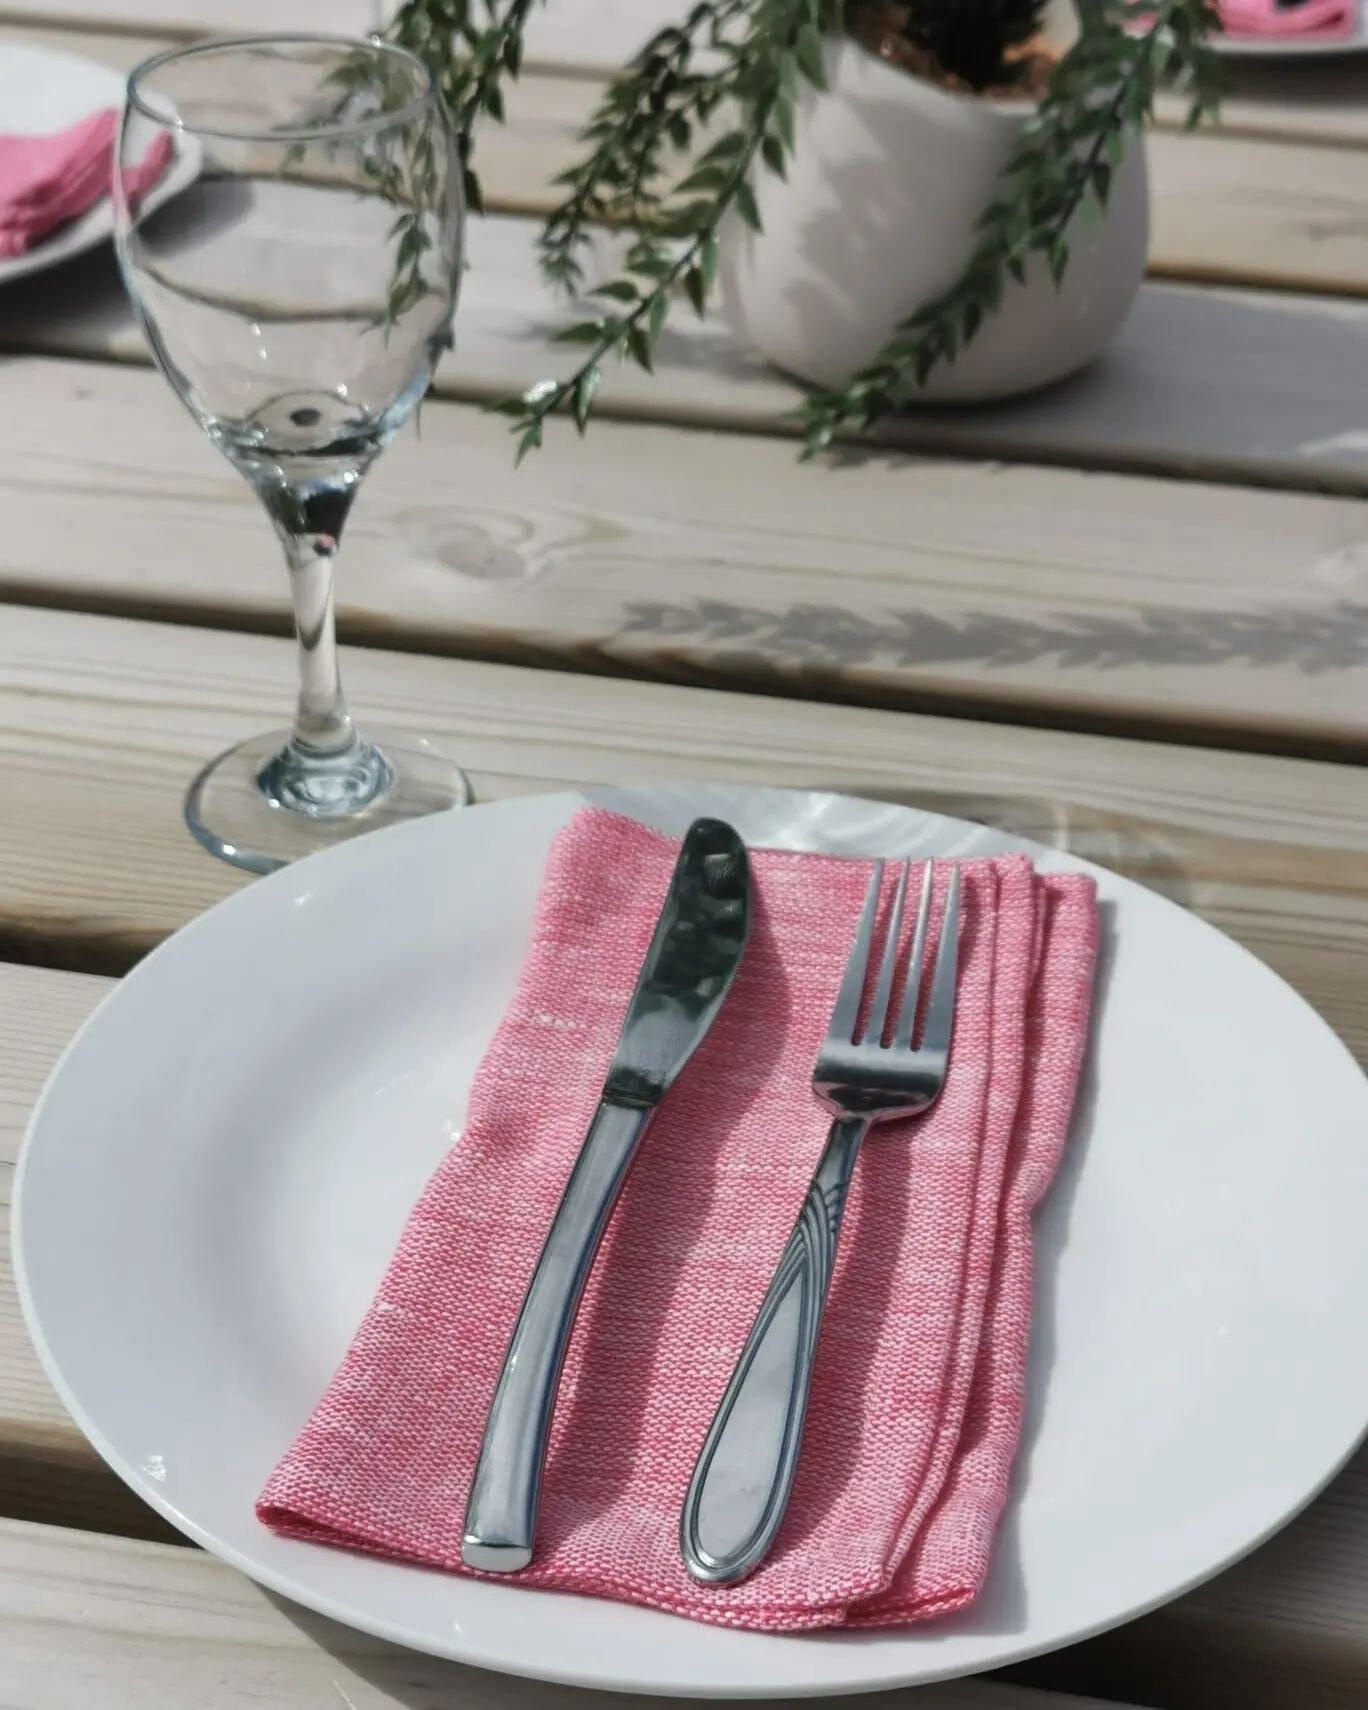 Looking to spice up your home dining this summer☀️? Our 100% Irish linen napkins bring a touch of luxury to the table🌾

With a range of vibrant colours to choose from your table style will be the envy of friends and family🍽

#mcnuttofdonegal #nothi